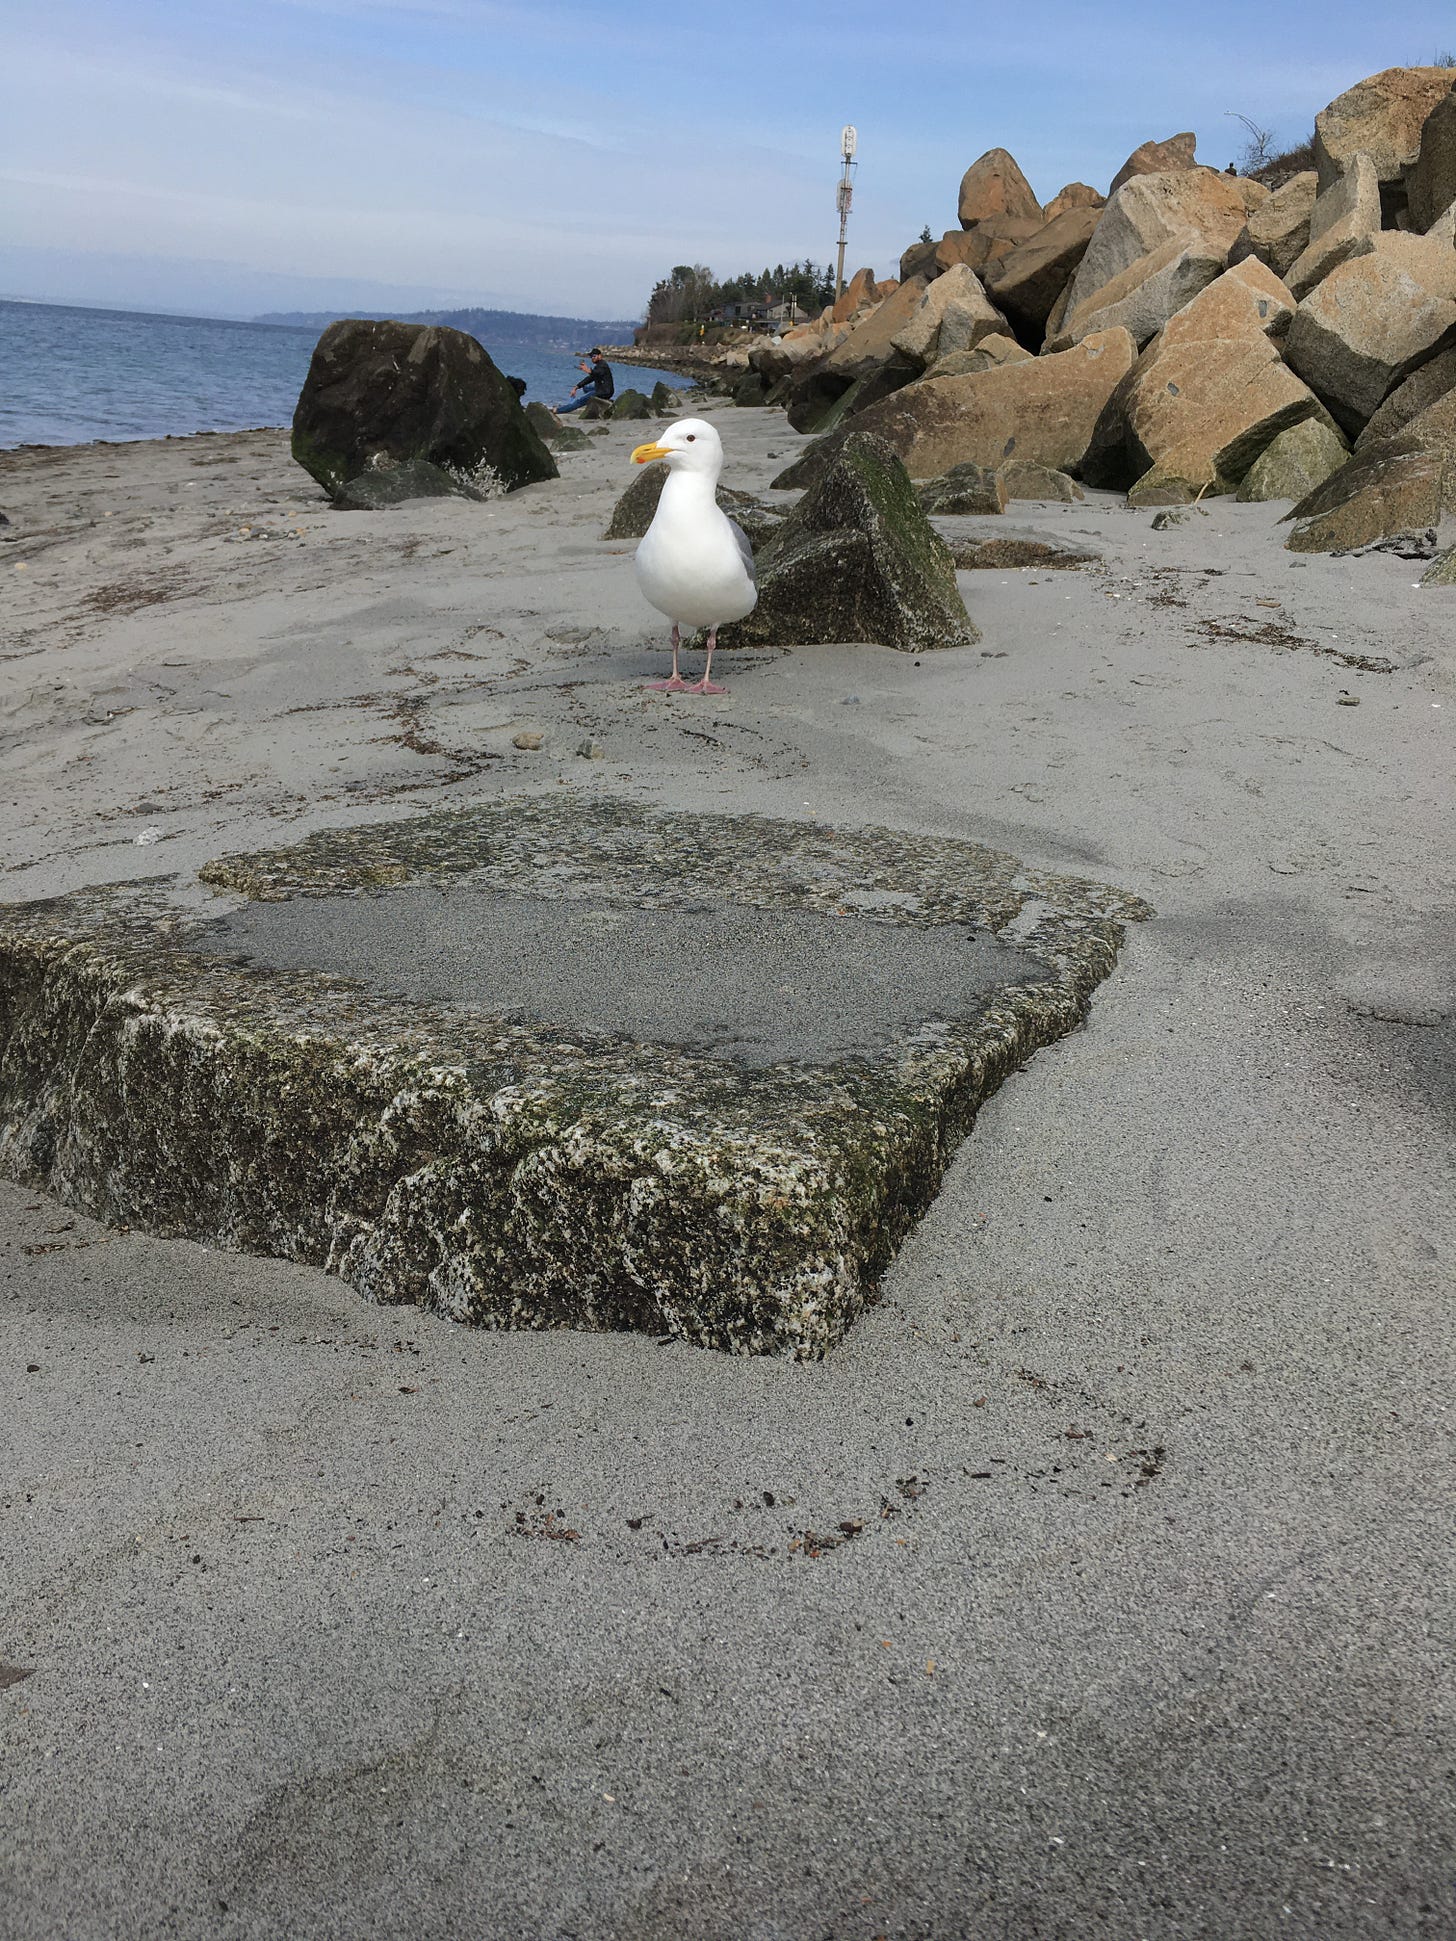 boulders on a sandy beach with a white seagull in the center top of the image looking at the camera with one eye and head tilted to the left. man squats in distance behind seagull. squatting at the waters edge and the Puget Sound seems calm in the background, blue and clouds in the skies behind all these beings.